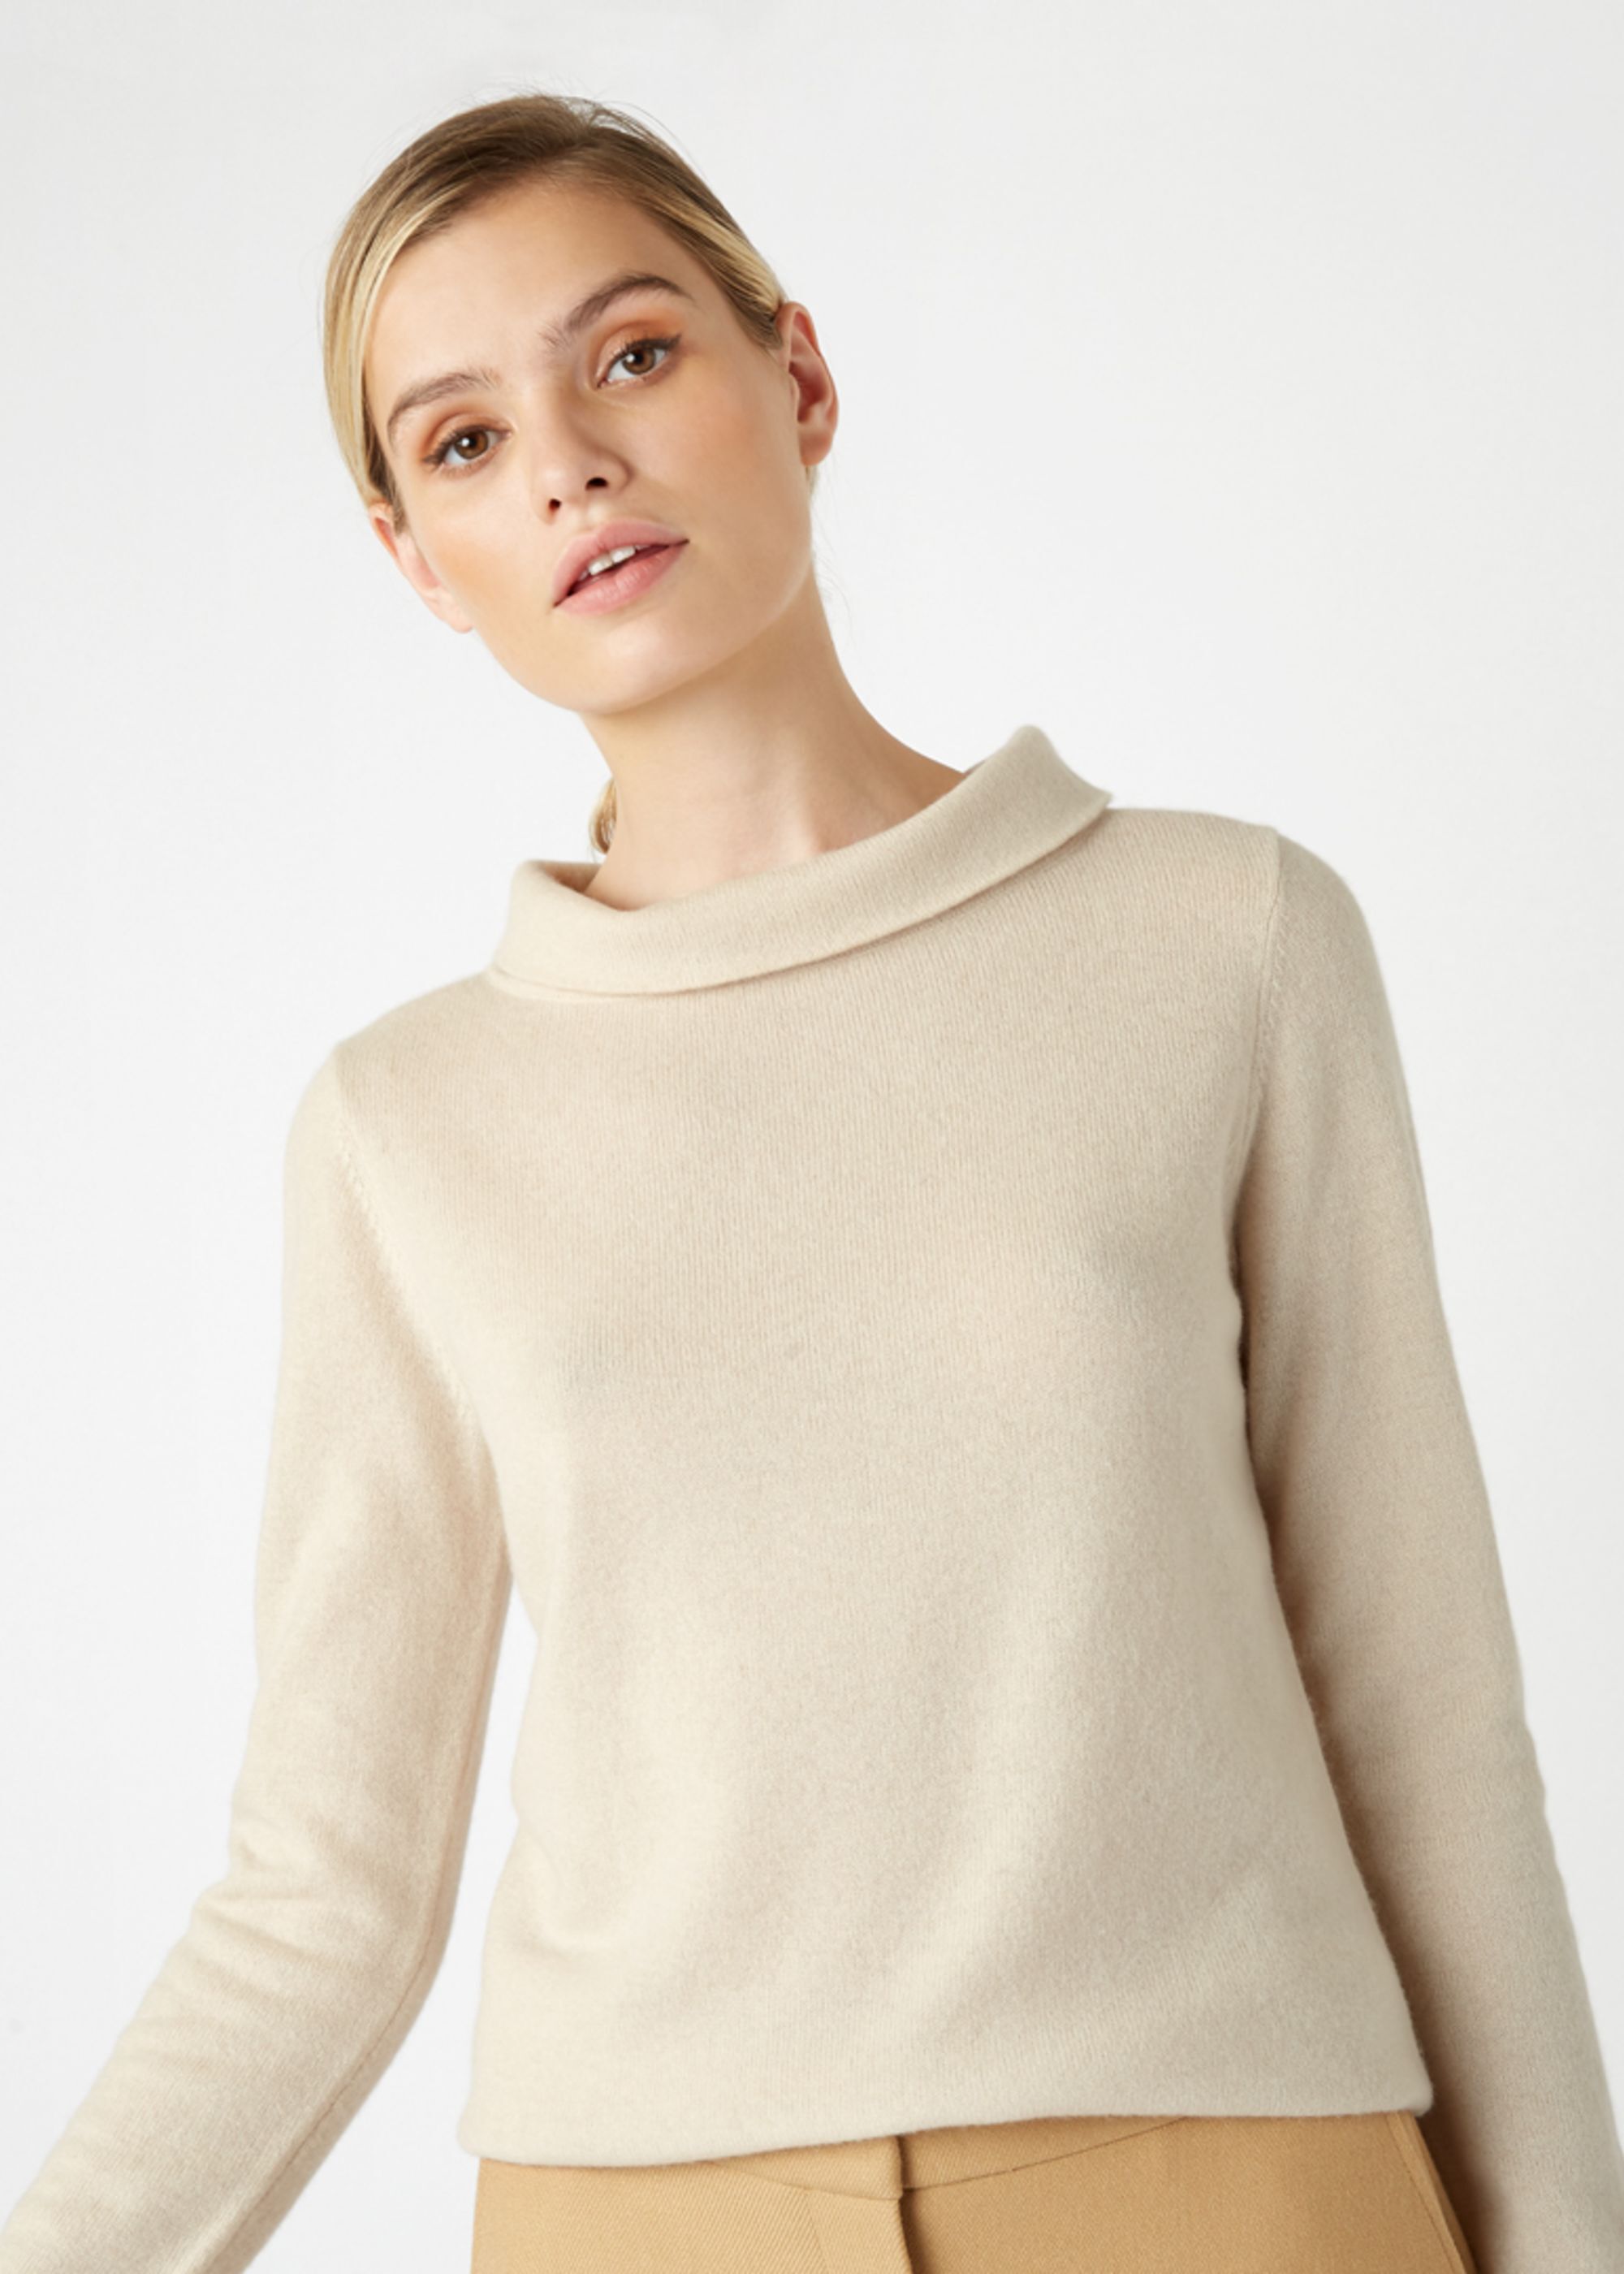 Hobbs Audrey Wool Cashmere Sweater Pullover Long Sleeve | eBay